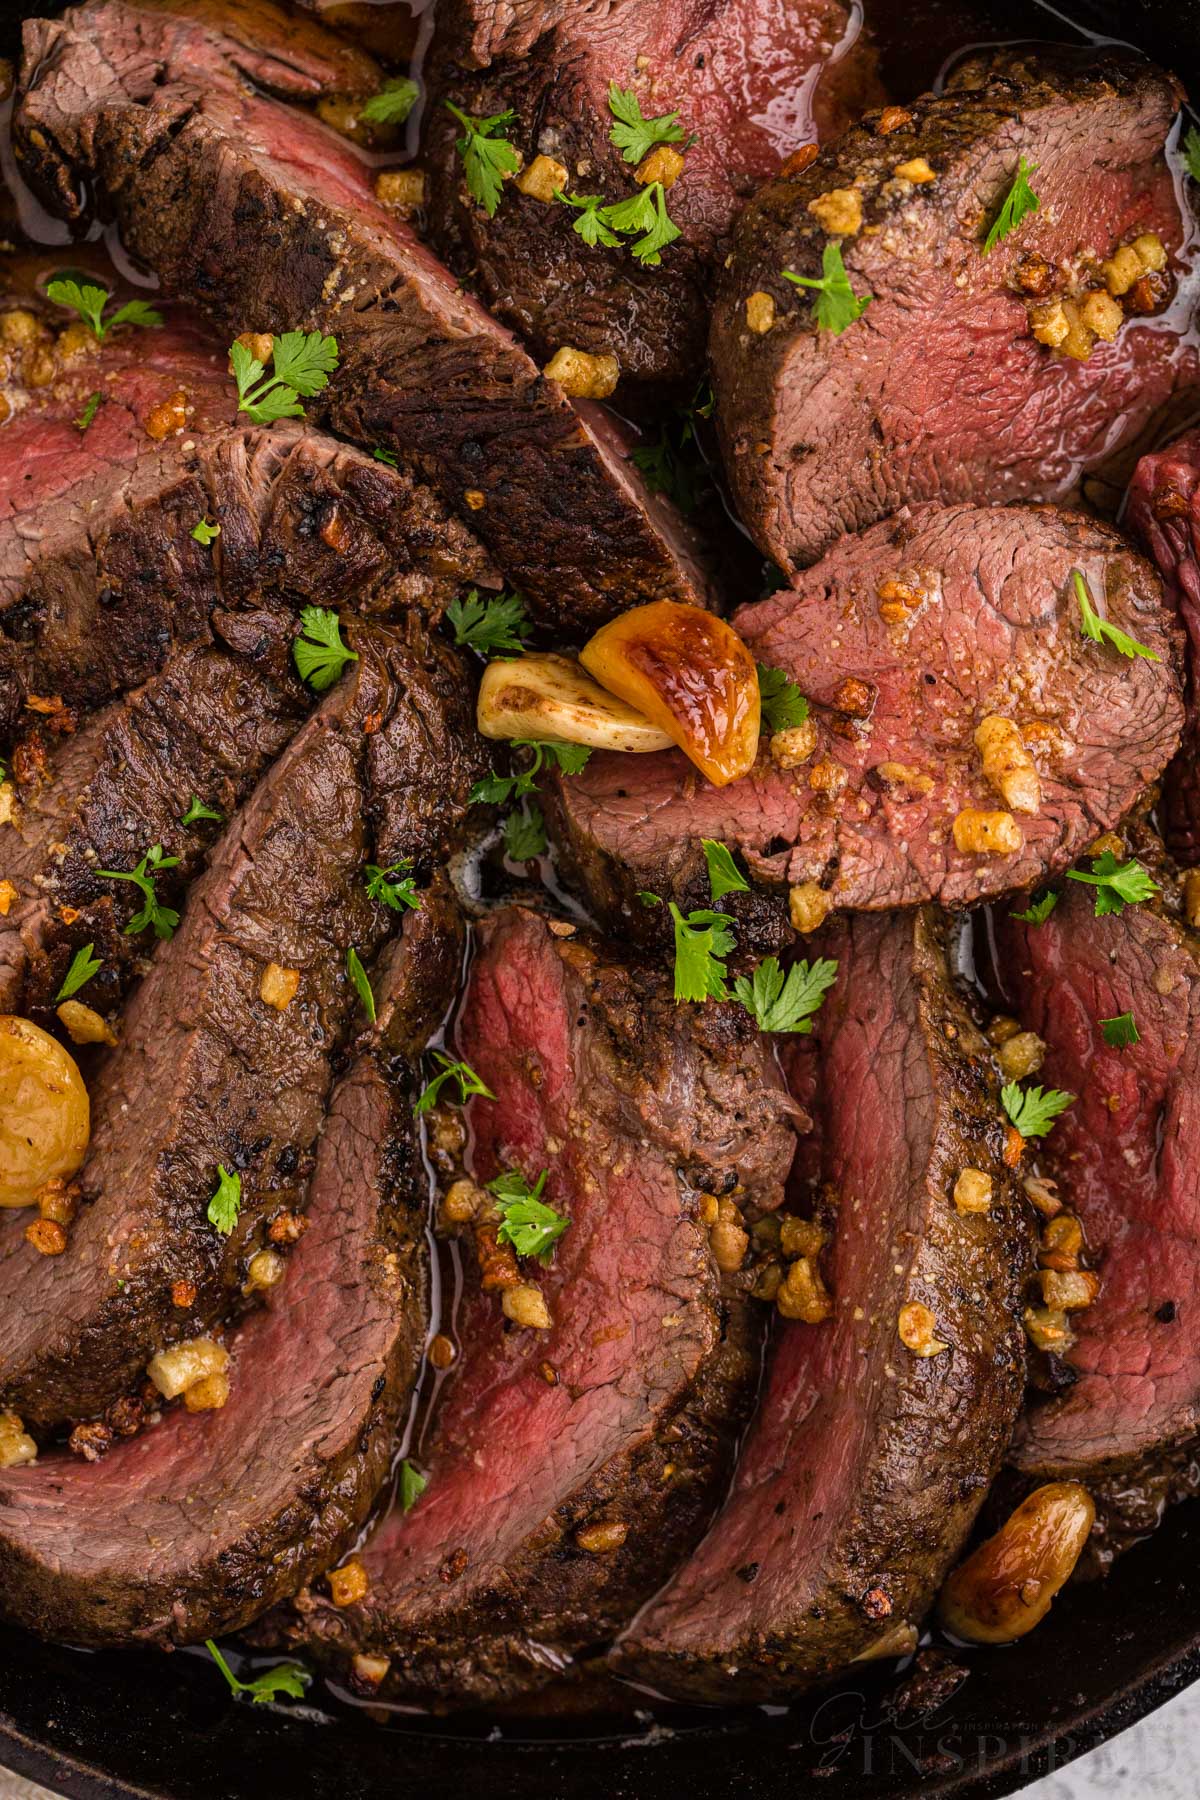 Close up of sliced roasted beef tenderloin in skillet with herb and roasted garlic garnish.